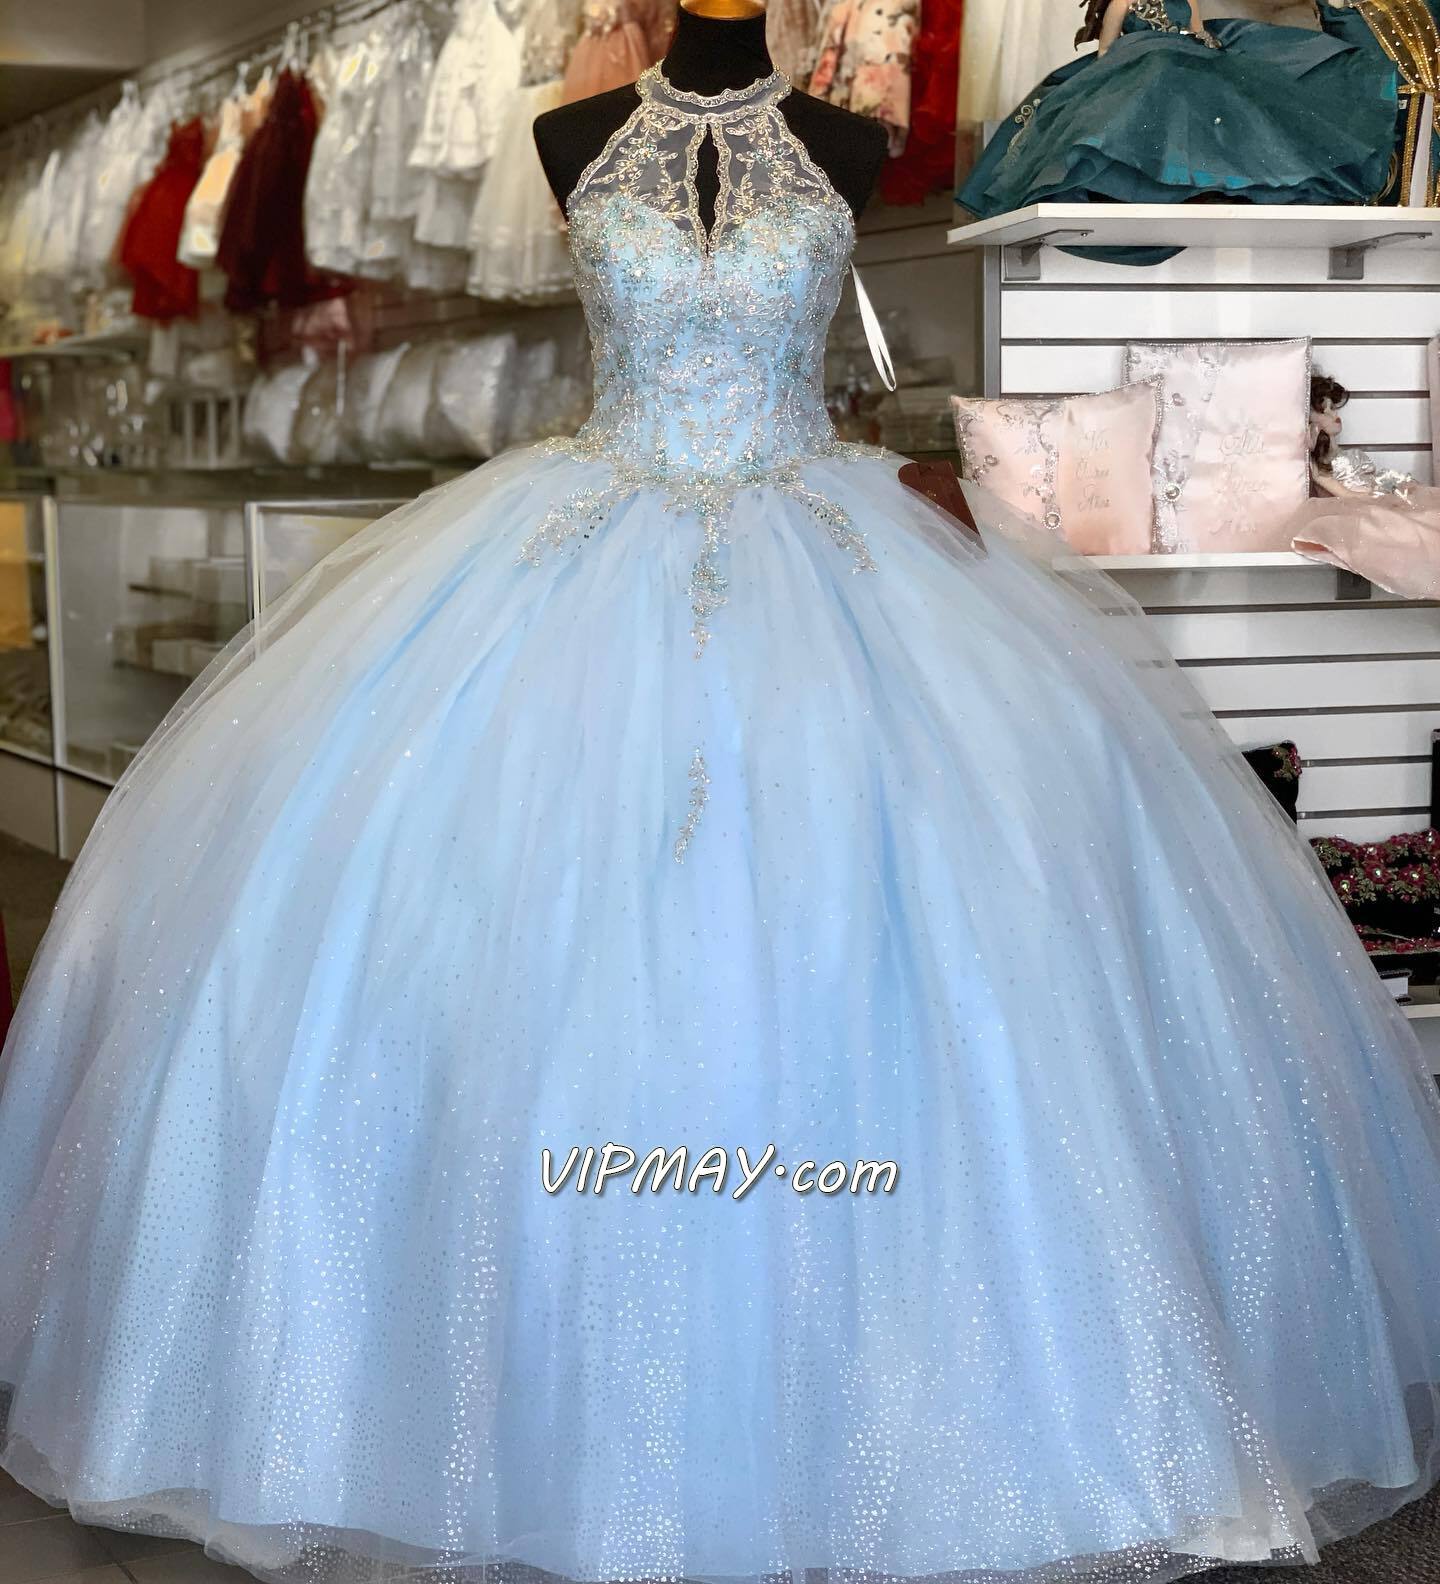 inexpensive quinceanera dress,cute and cheap winter wonderland quinceanera dress,where can i find cheap quinceanera dress,baby blue quinceanera dress,puffy sweet 16 dress,puffy quinceanera dress,keyhole neck quinceanera dress,